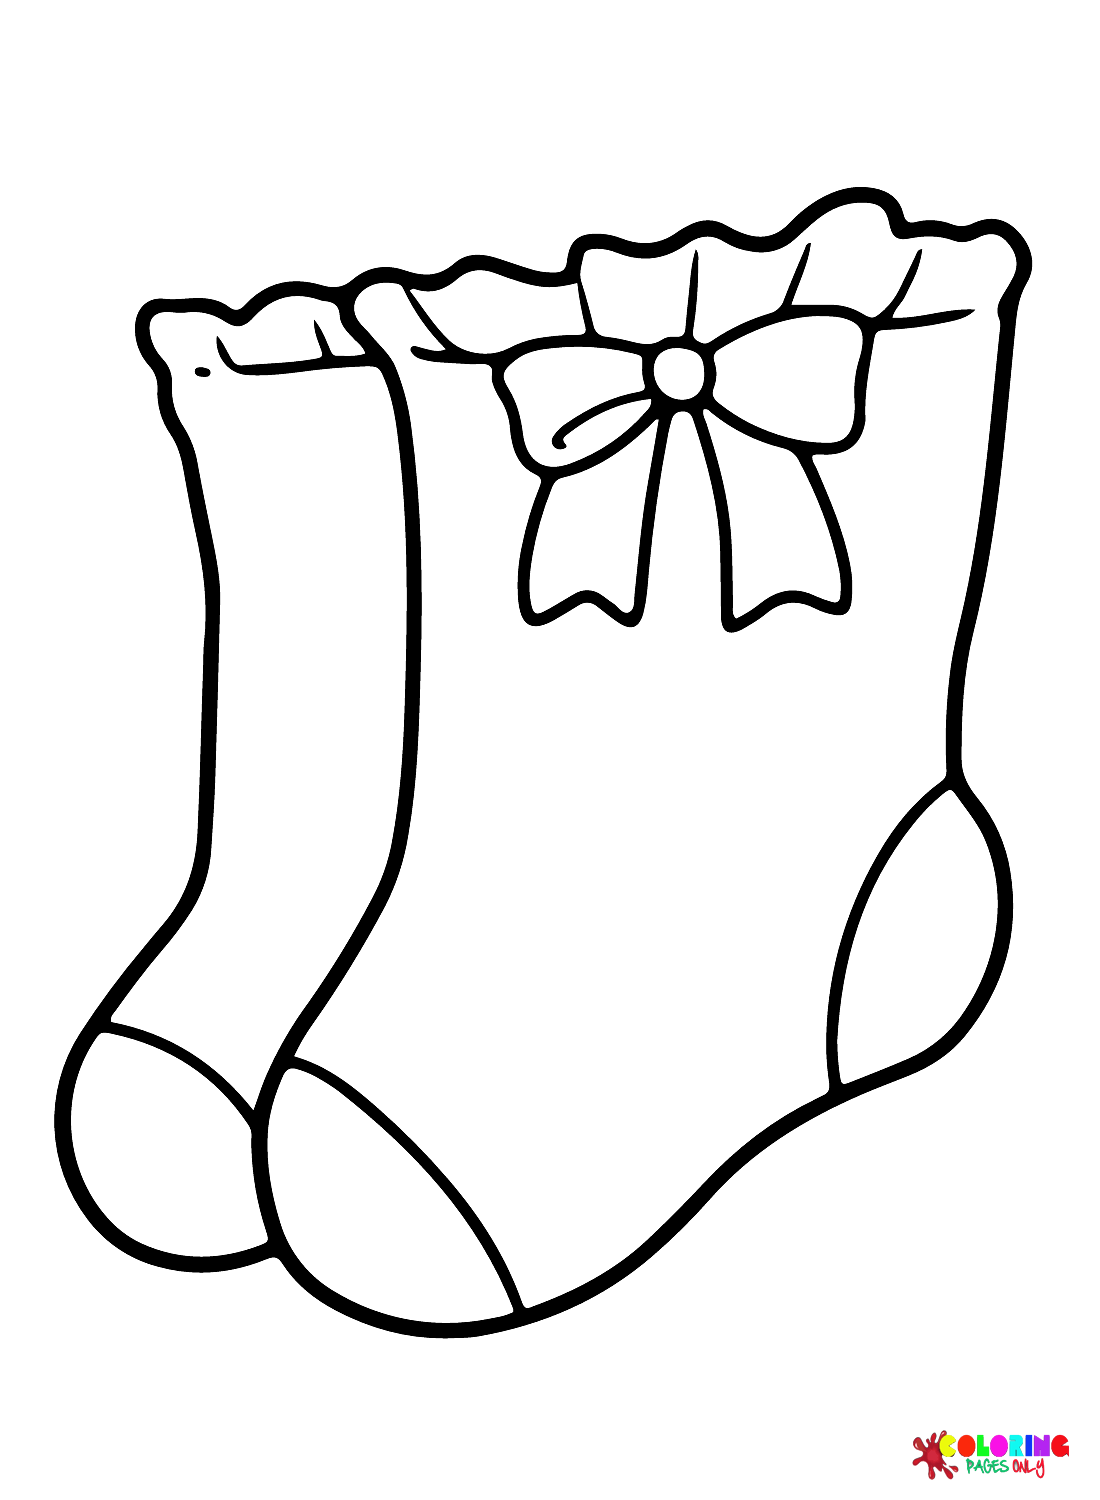 Socks Coloring Pages - Free Printable Coloring Pages